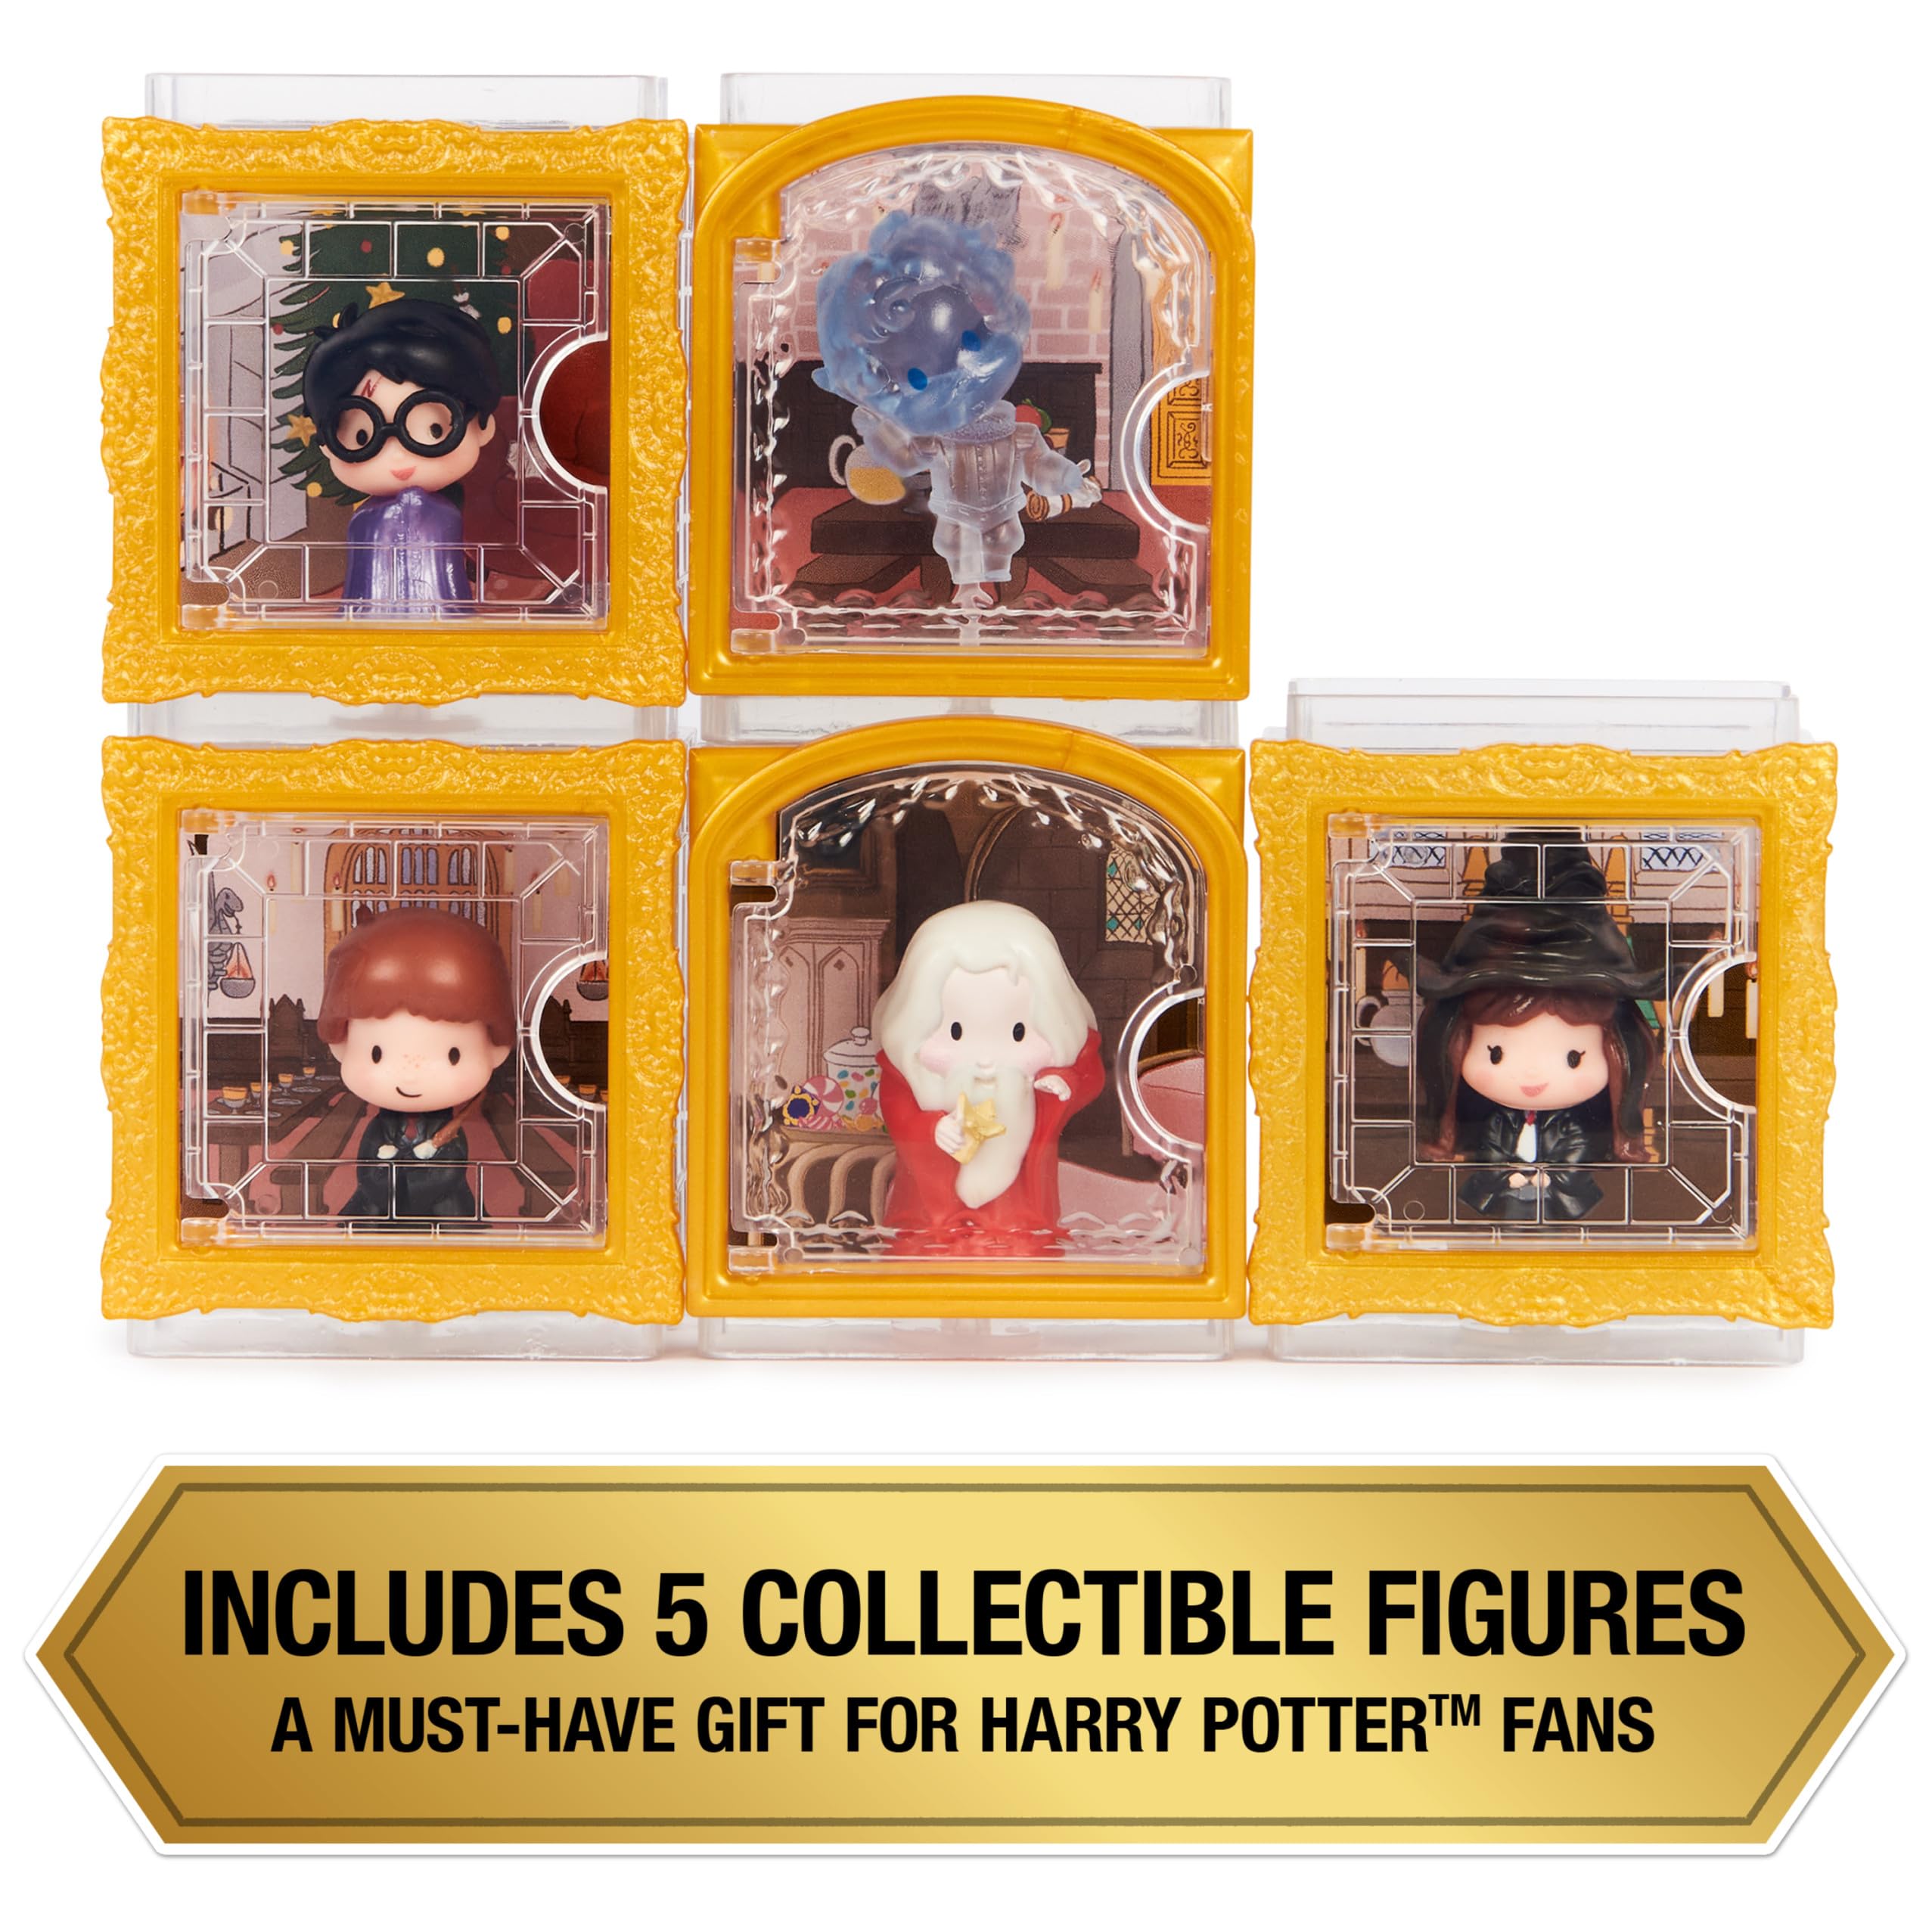 Wizarding World Harry Potter, Micro Magical Moments Hogwarts 5-Pack Mini Figures Gift Set with Display Cases (Amazon Exclusive), Kids Toys for Ages 6+